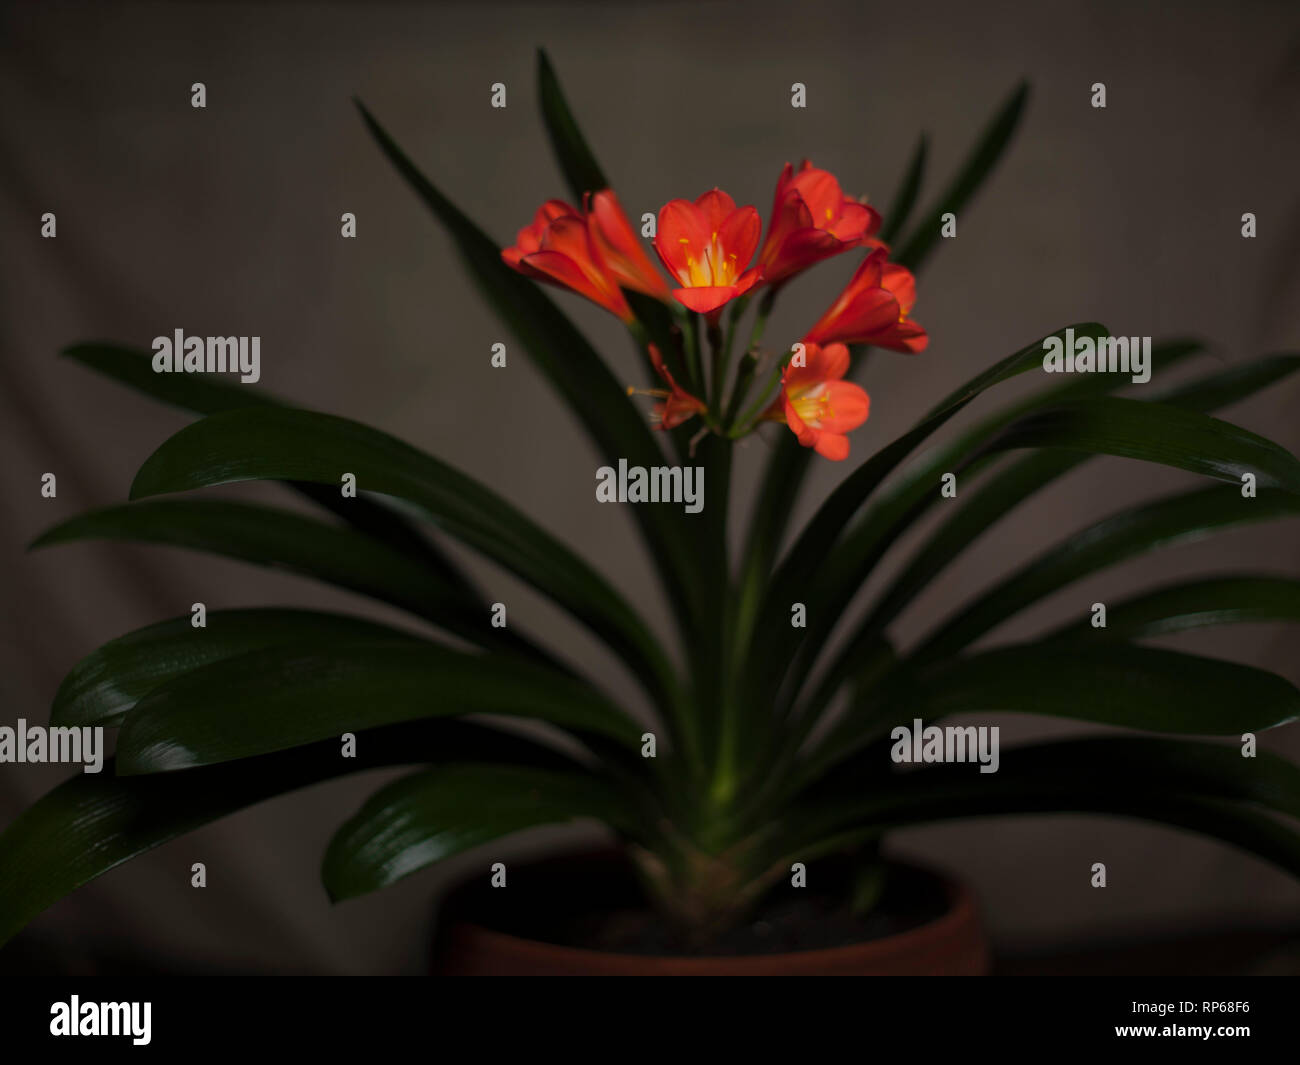 Orange Clivia with Long Green Leaves in Ceramic Pot Stock Photo